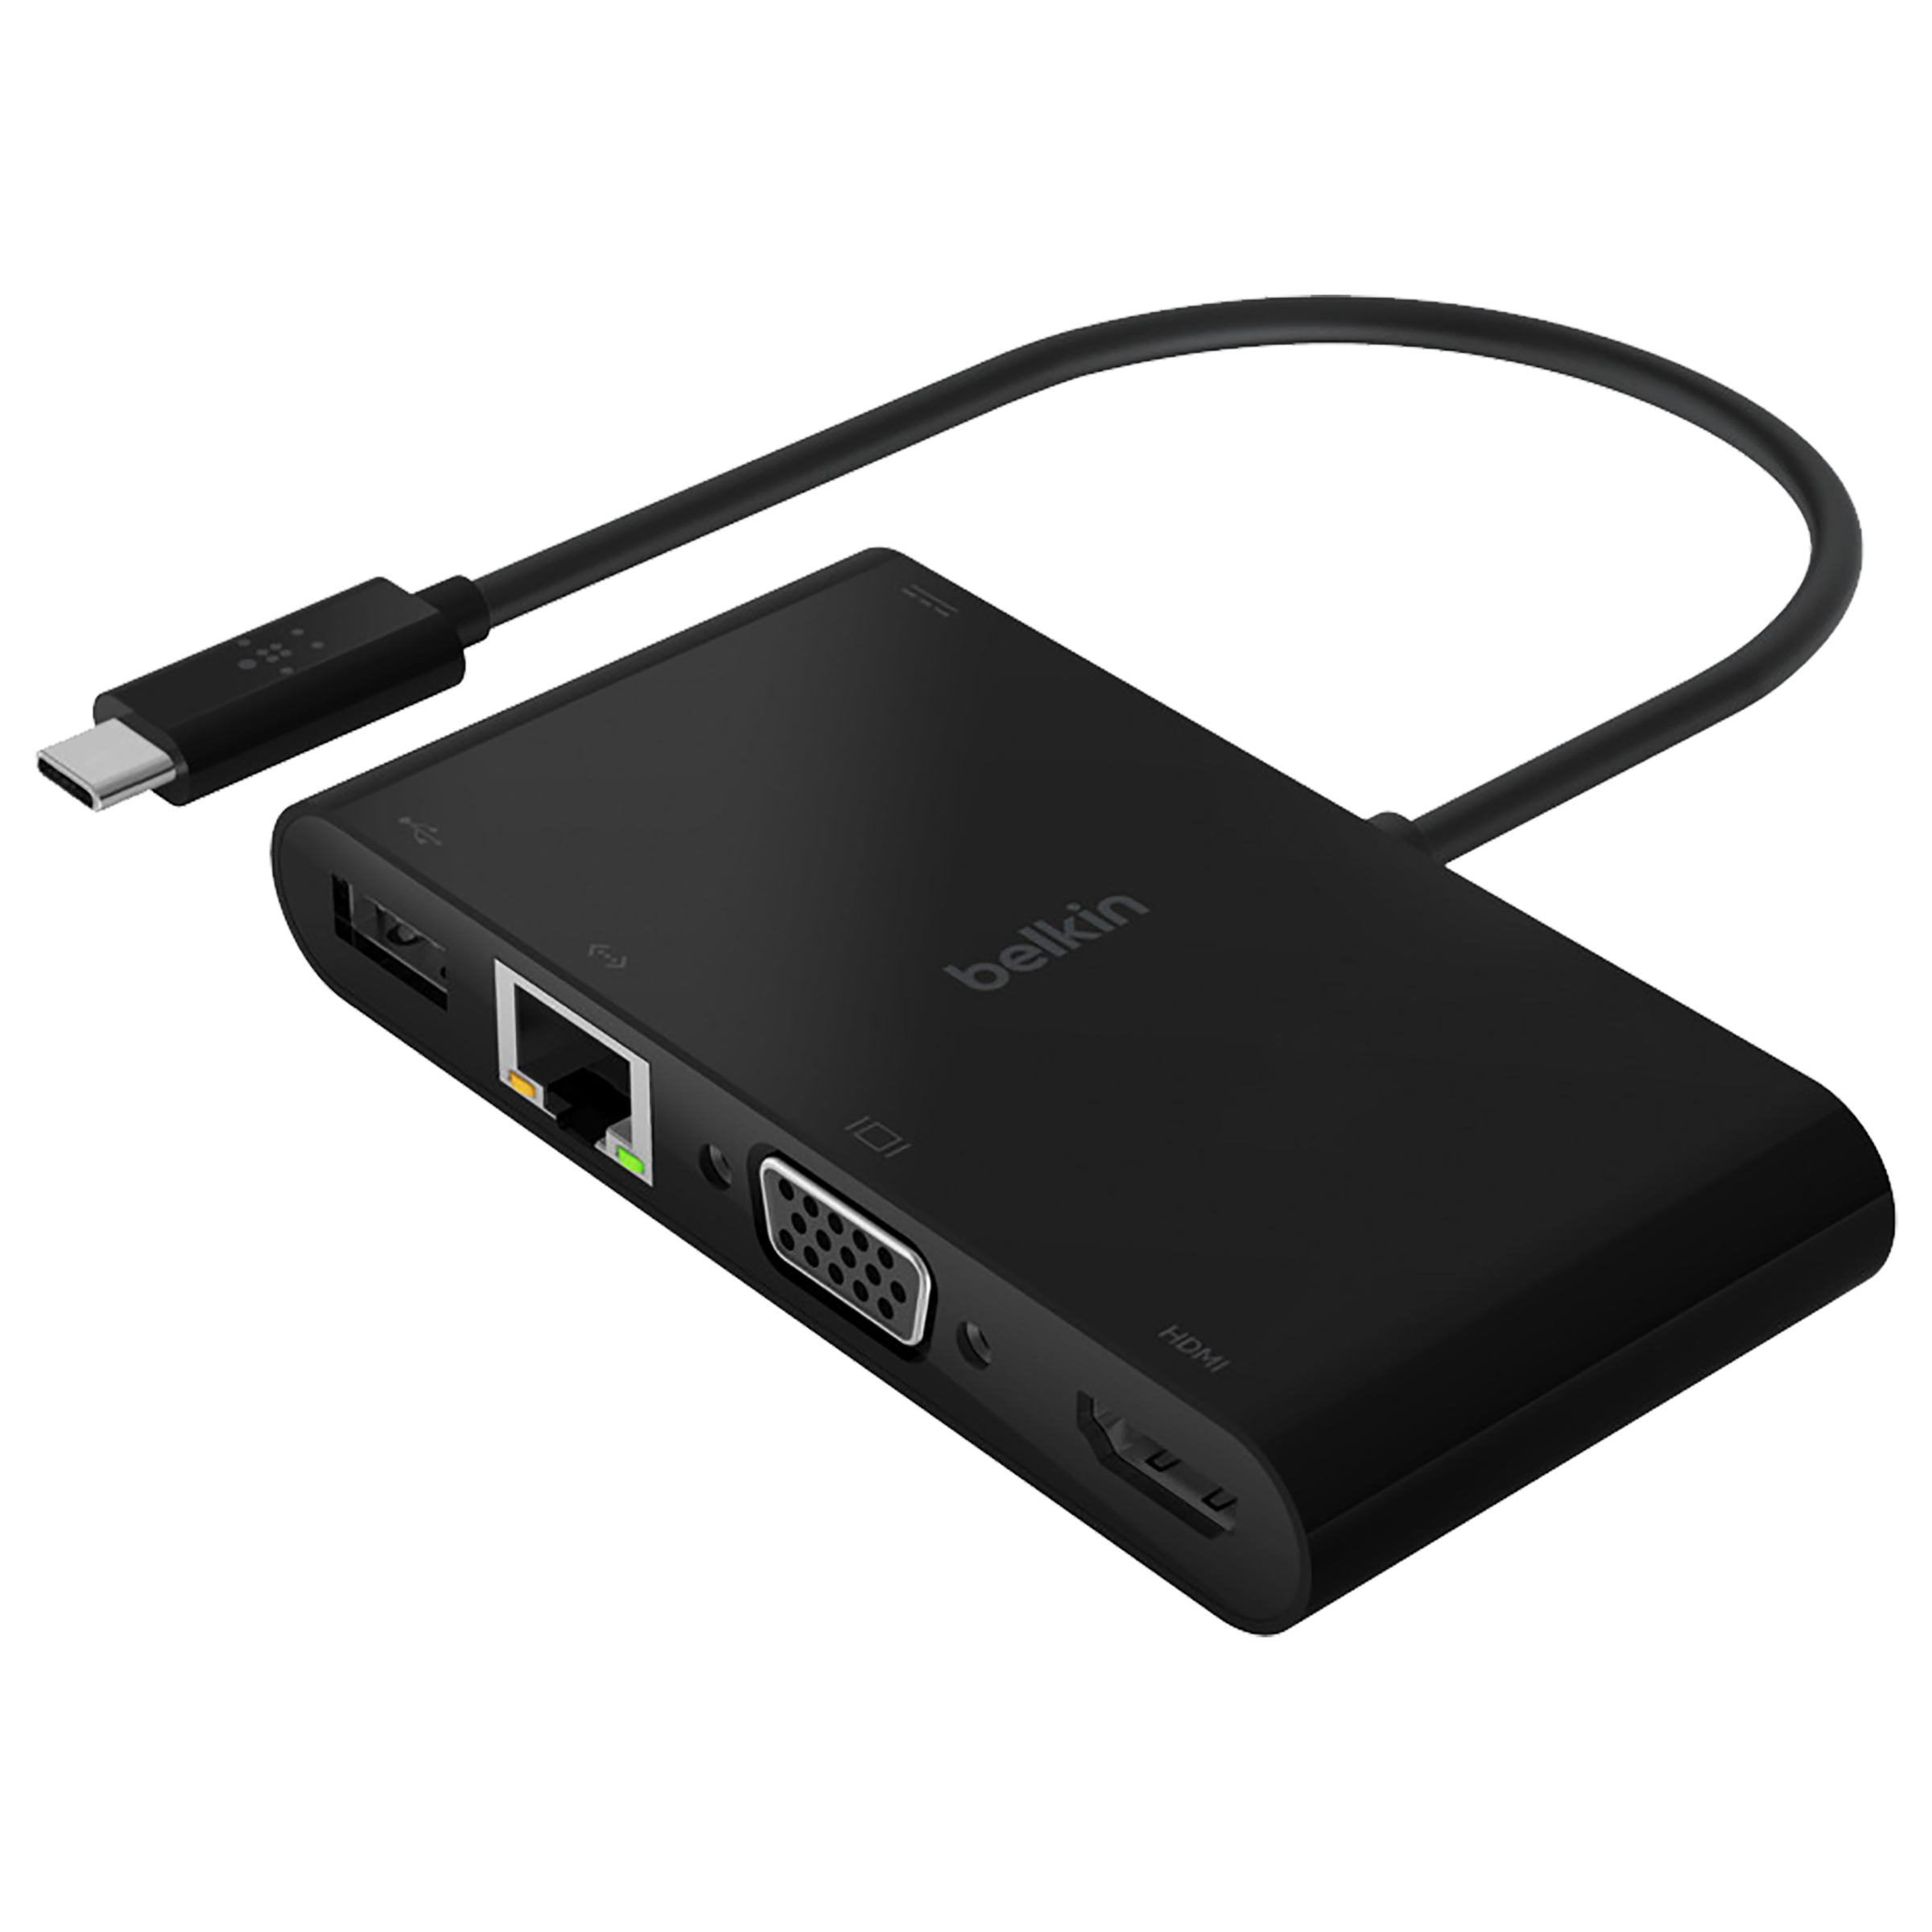 Belkin 15 Meter USB 2.0 (Type-C) to Ethernet / USB 3.0 (Type-A) / VGA / HDMI (Type-A) Multi Utility Multiport Adapter (Supports Data Transfer, AVC004btBK, Black)_1